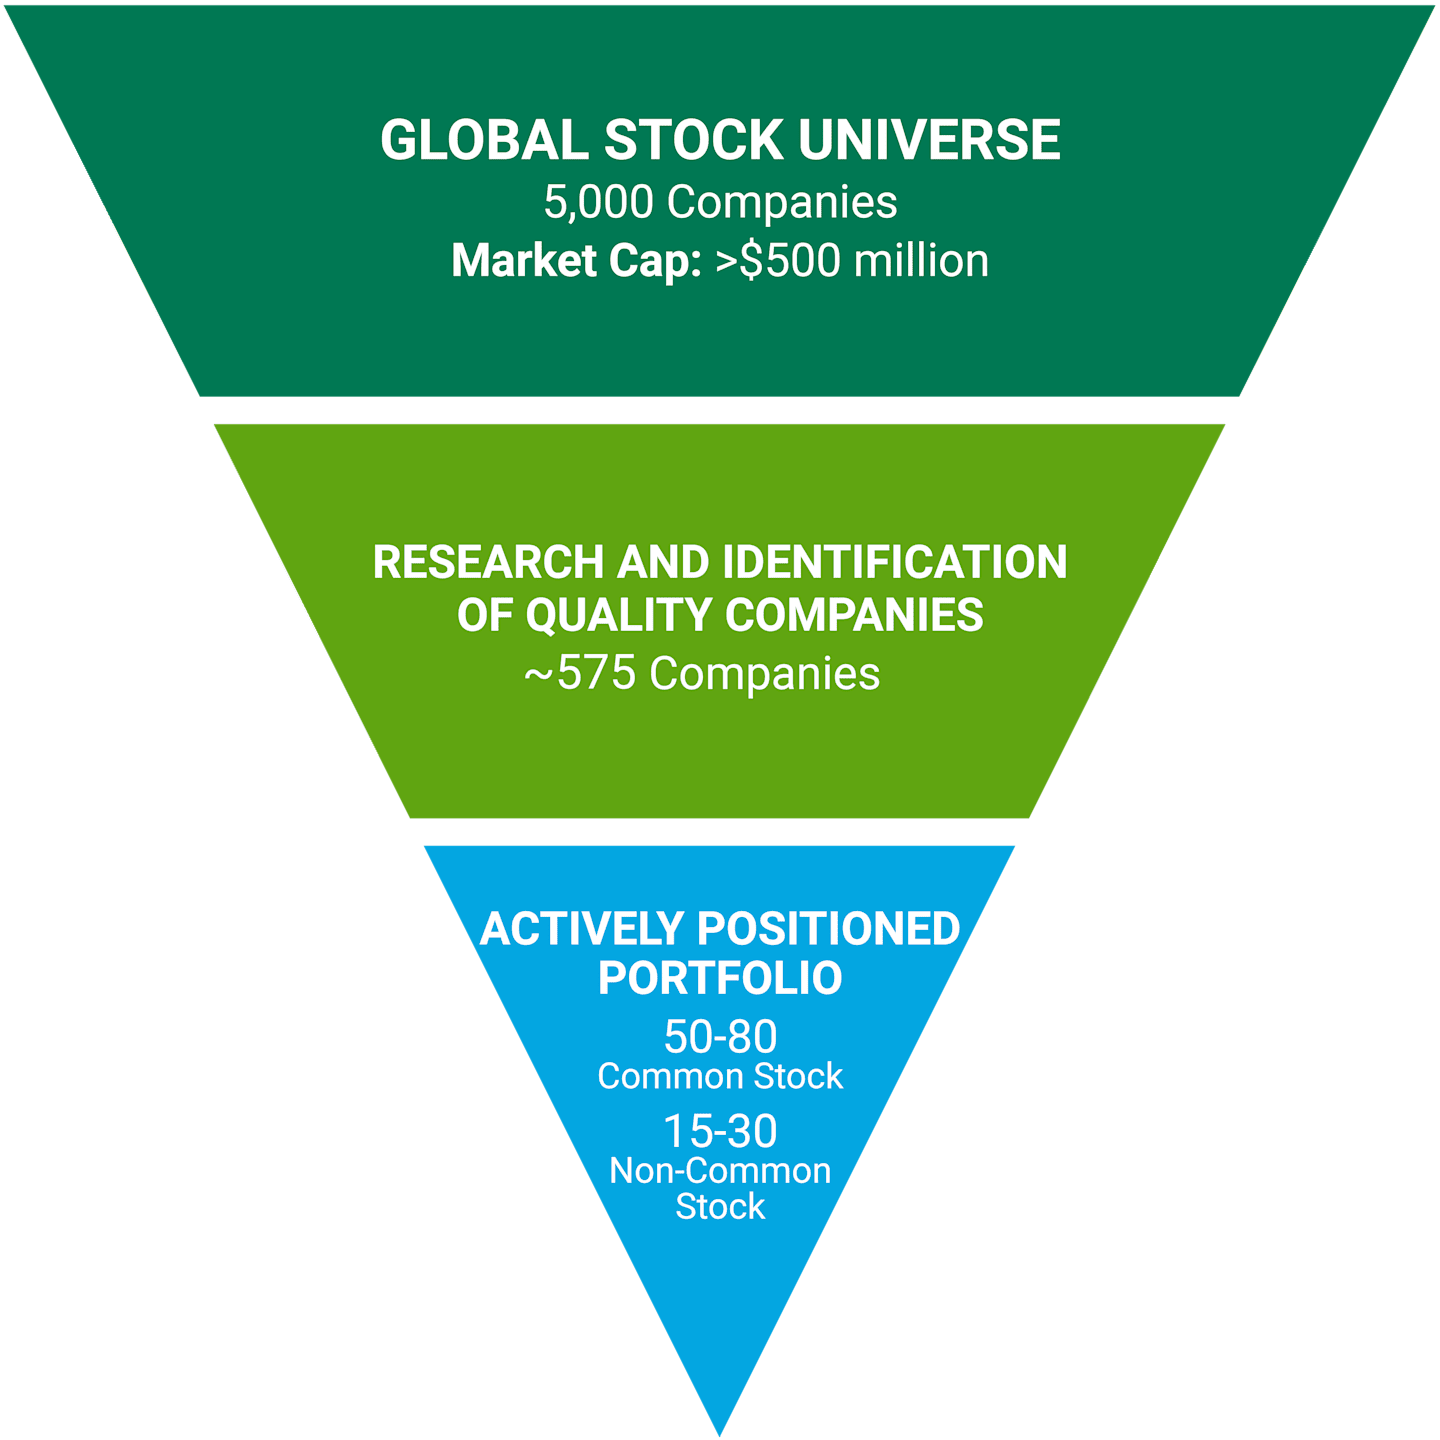 Global Stock Universe: 5,000 companies, market cap >$500M. Research and Identification of Quality Companies: 550 companies. Actively Positioned Portfolio: 50-80 common stock, 15-30 non-common stock. 